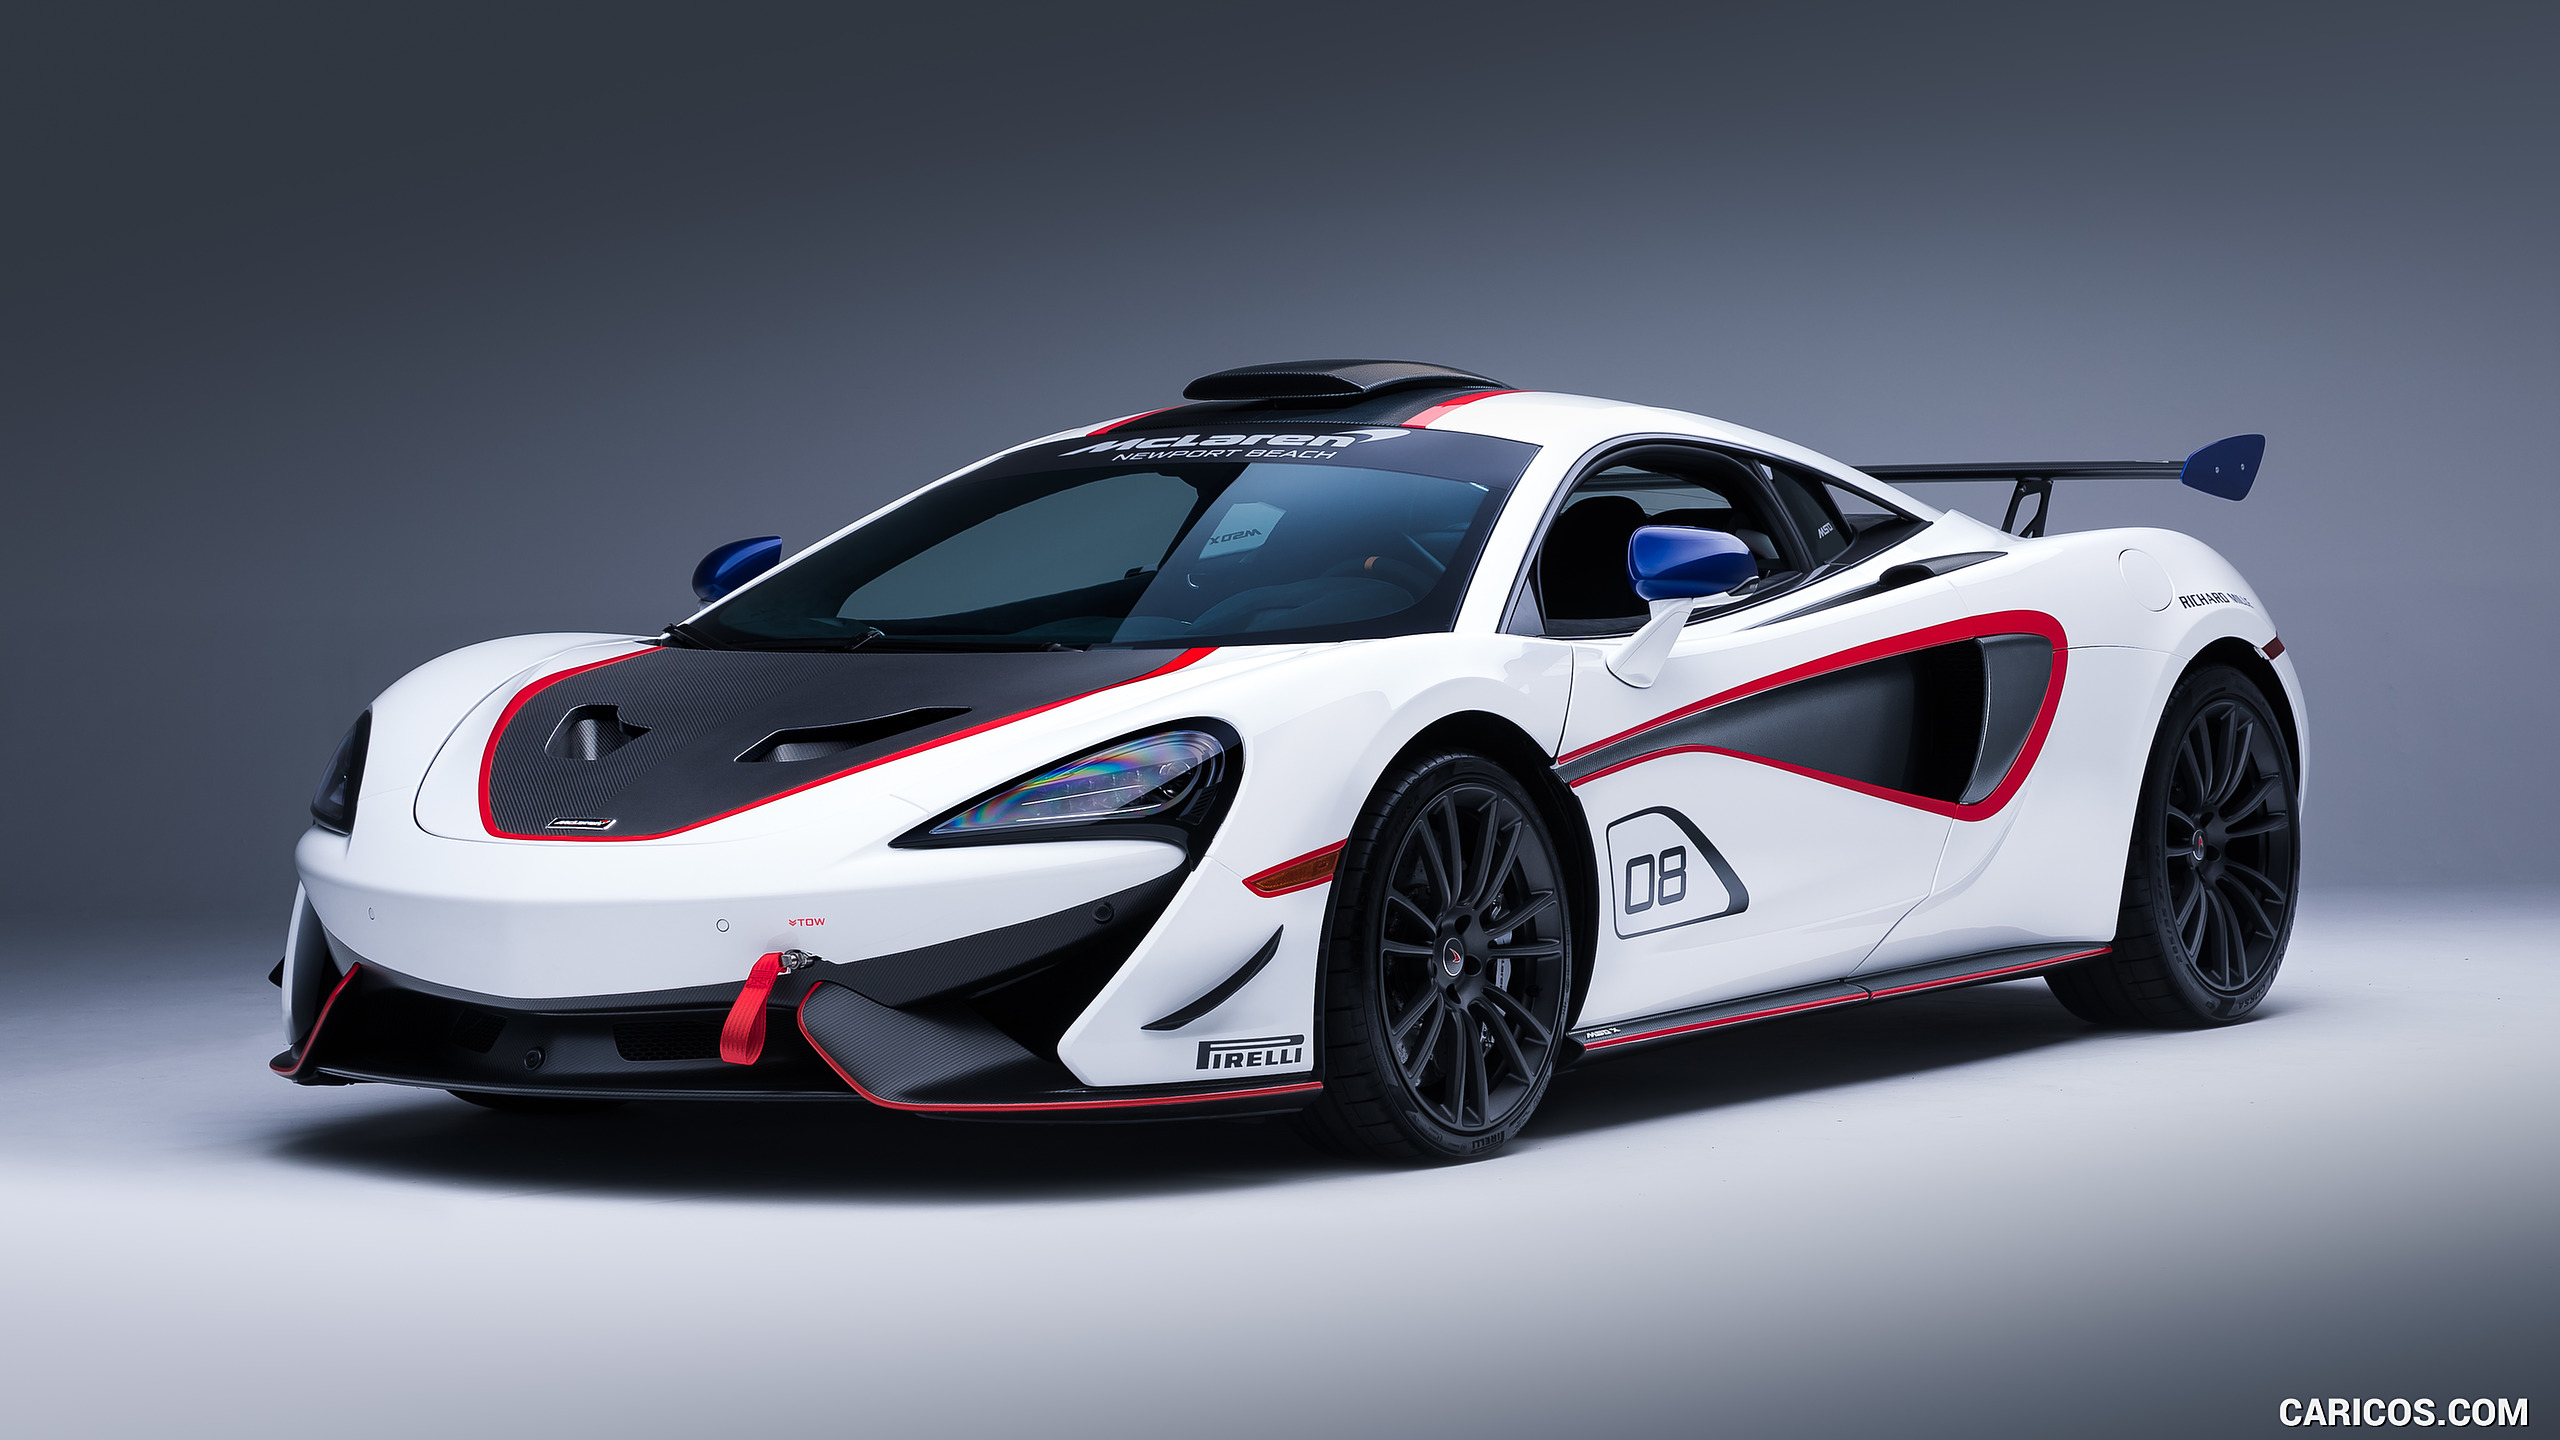 2018 McLaren 570S GT4 MSO X No. 8 White Red And Blue Accents - Front Three-Quarter, #1 of 22